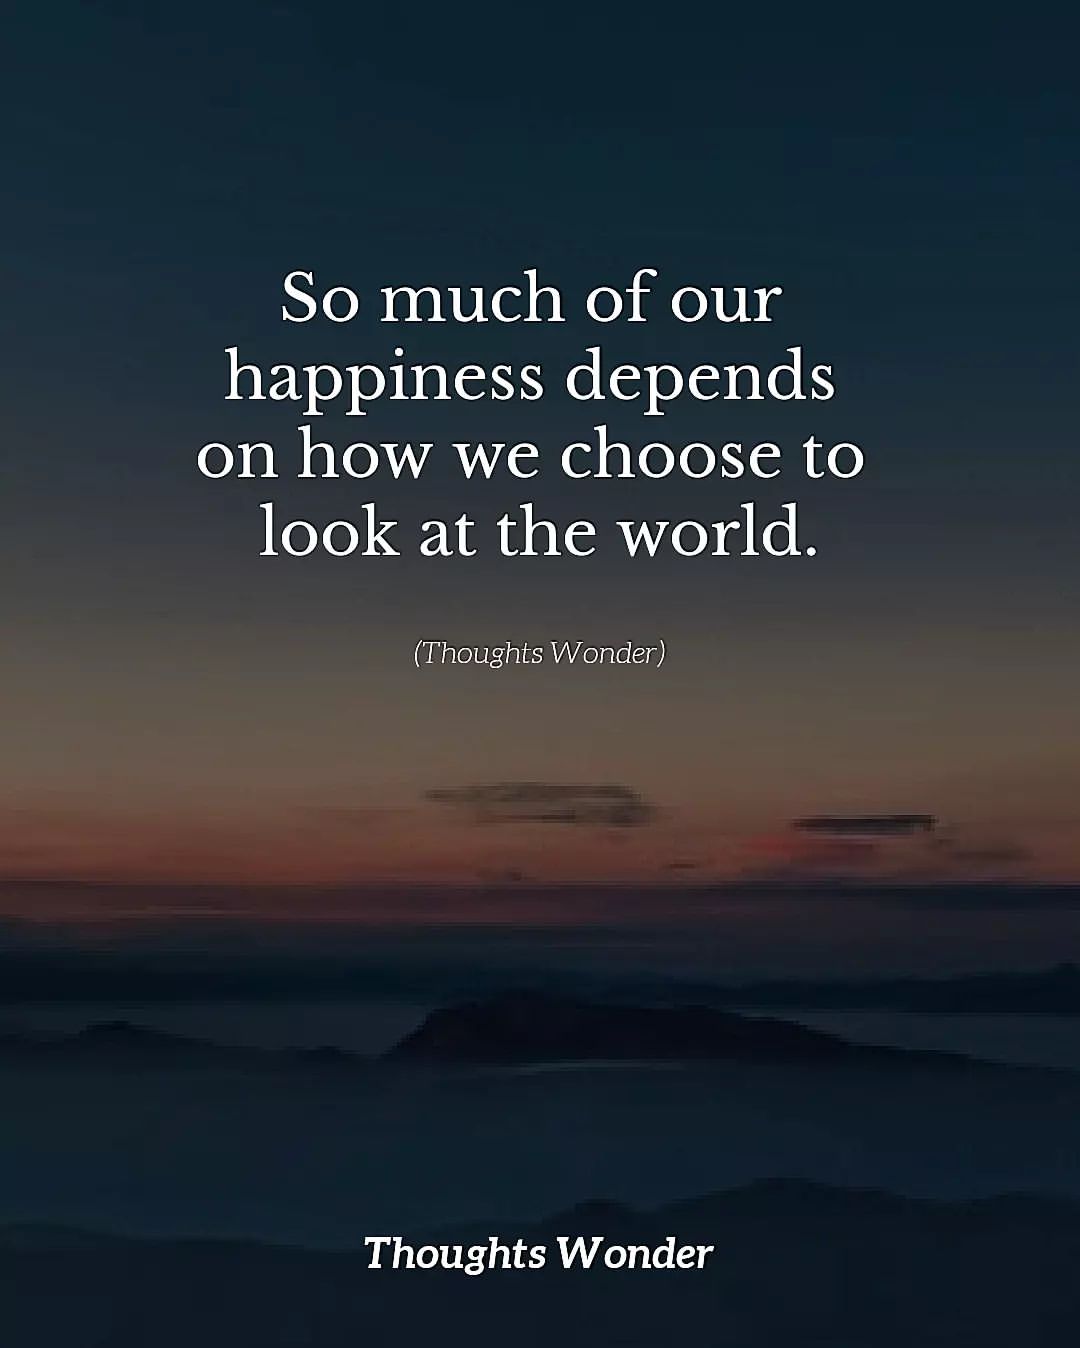 So much of our happiness depends on how we choose to look at the world.